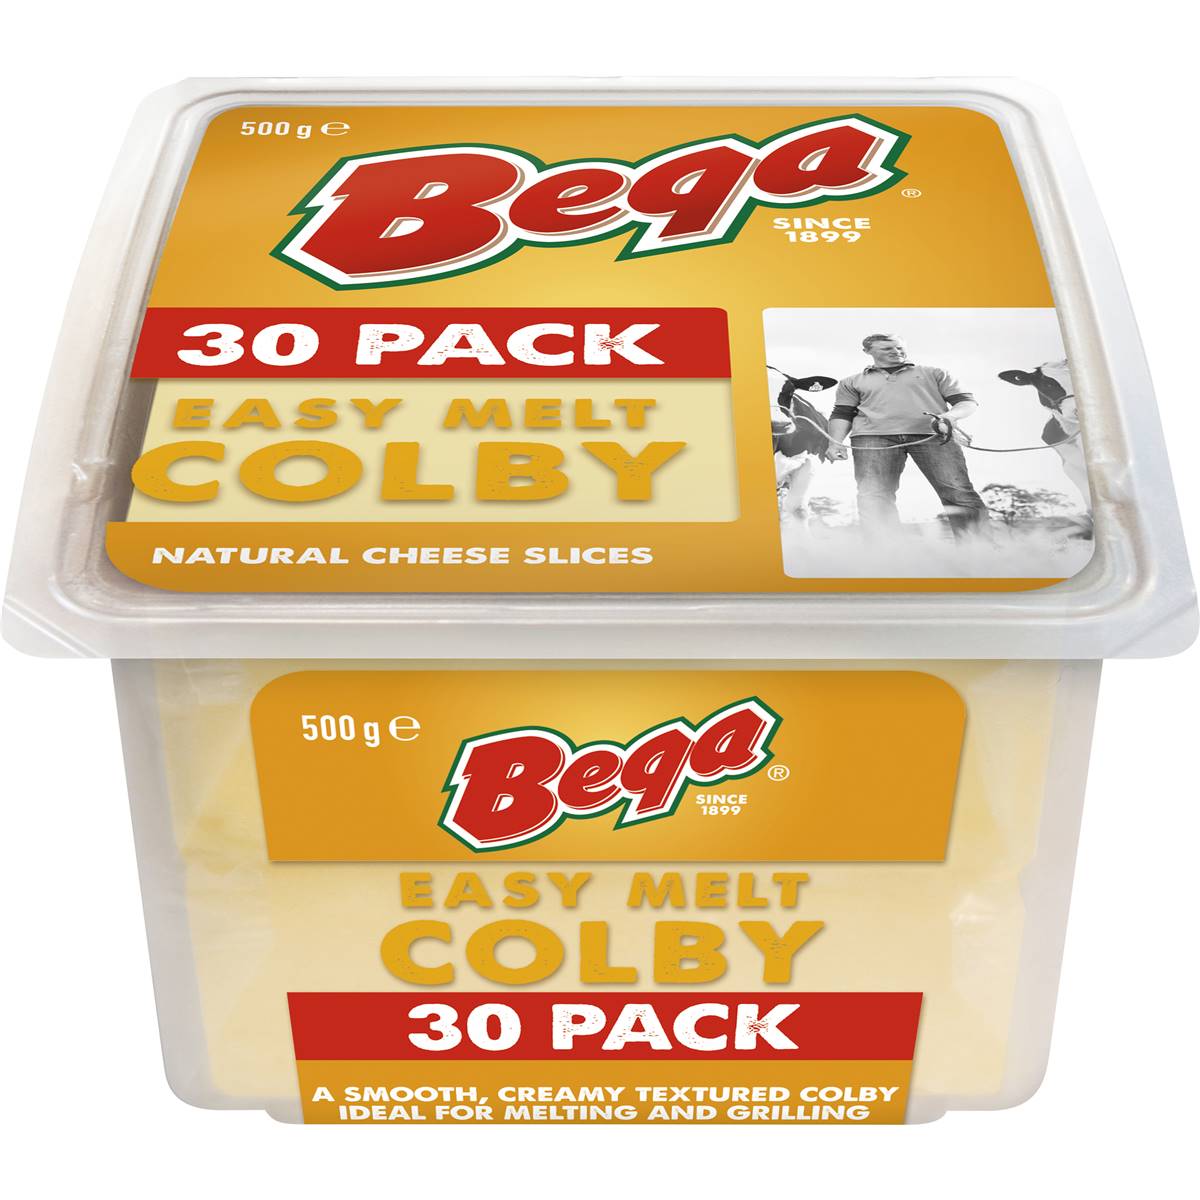 Bega Sliced Colby Cheese 500g